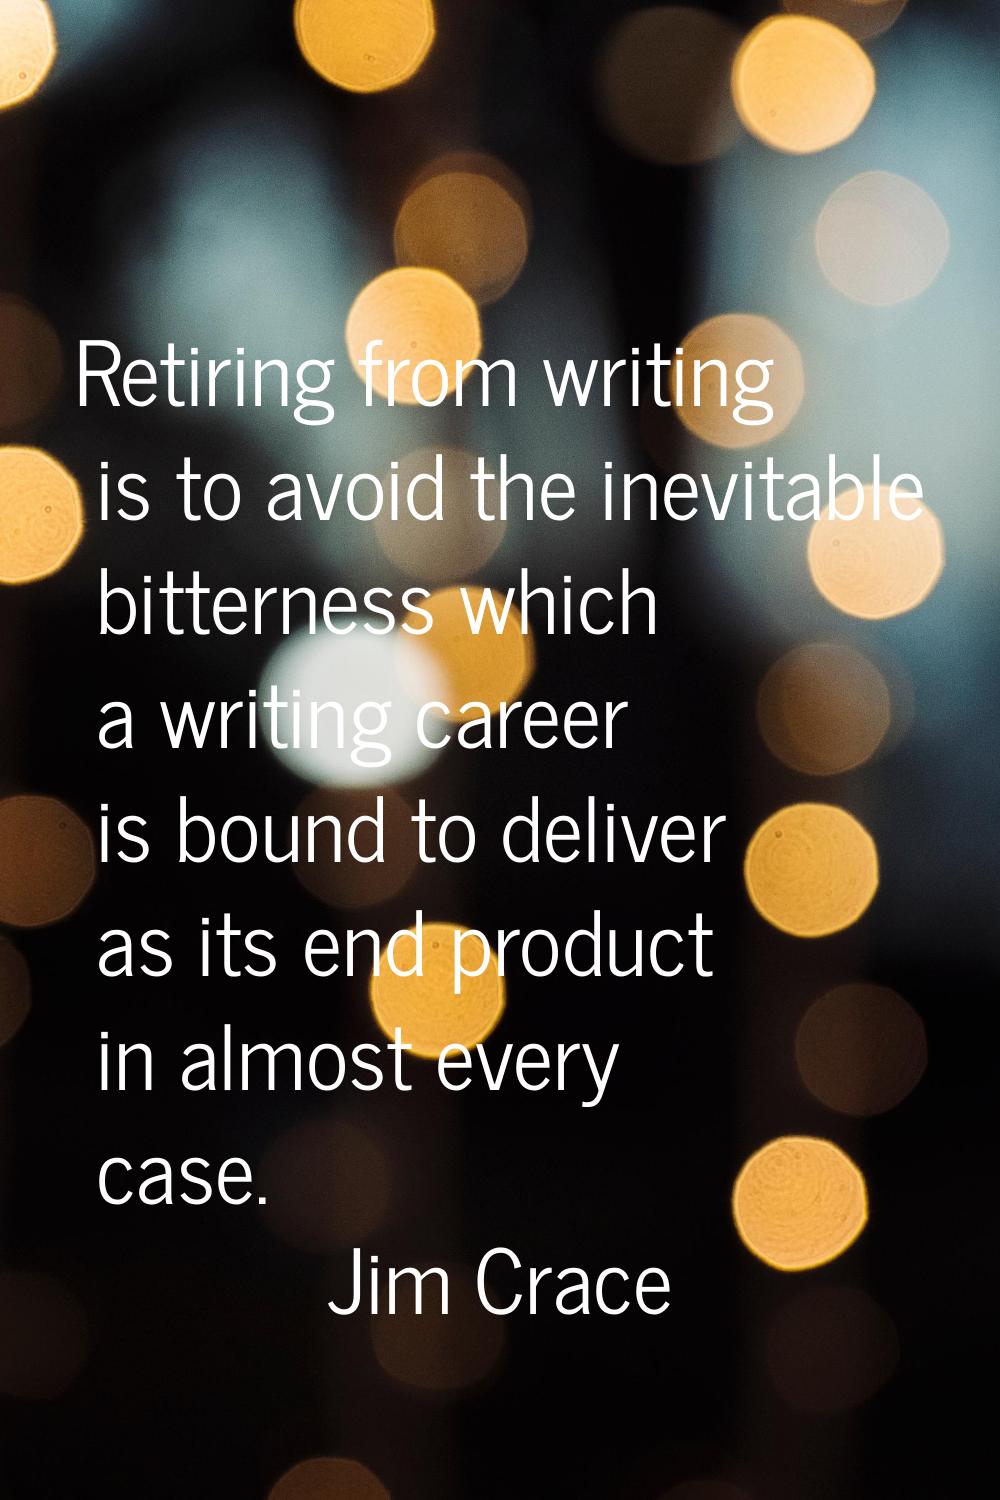 Retiring from writing is to avoid the inevitable bitterness which a writing career is bound to deli